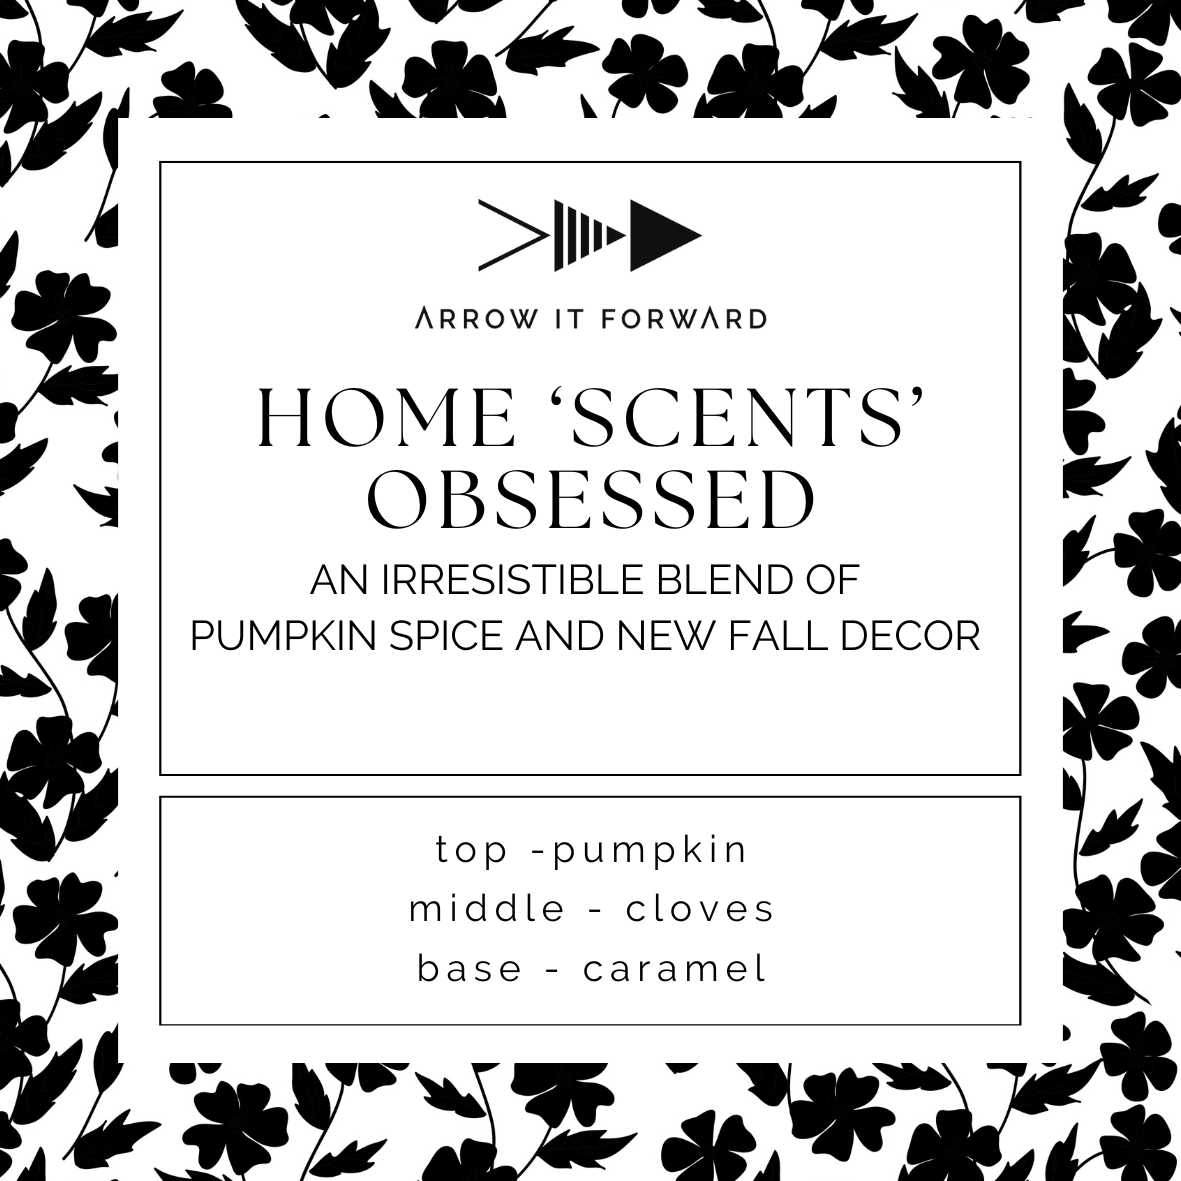 HOME ‘SCENTS’ OBSESSED Room & Linen Spray